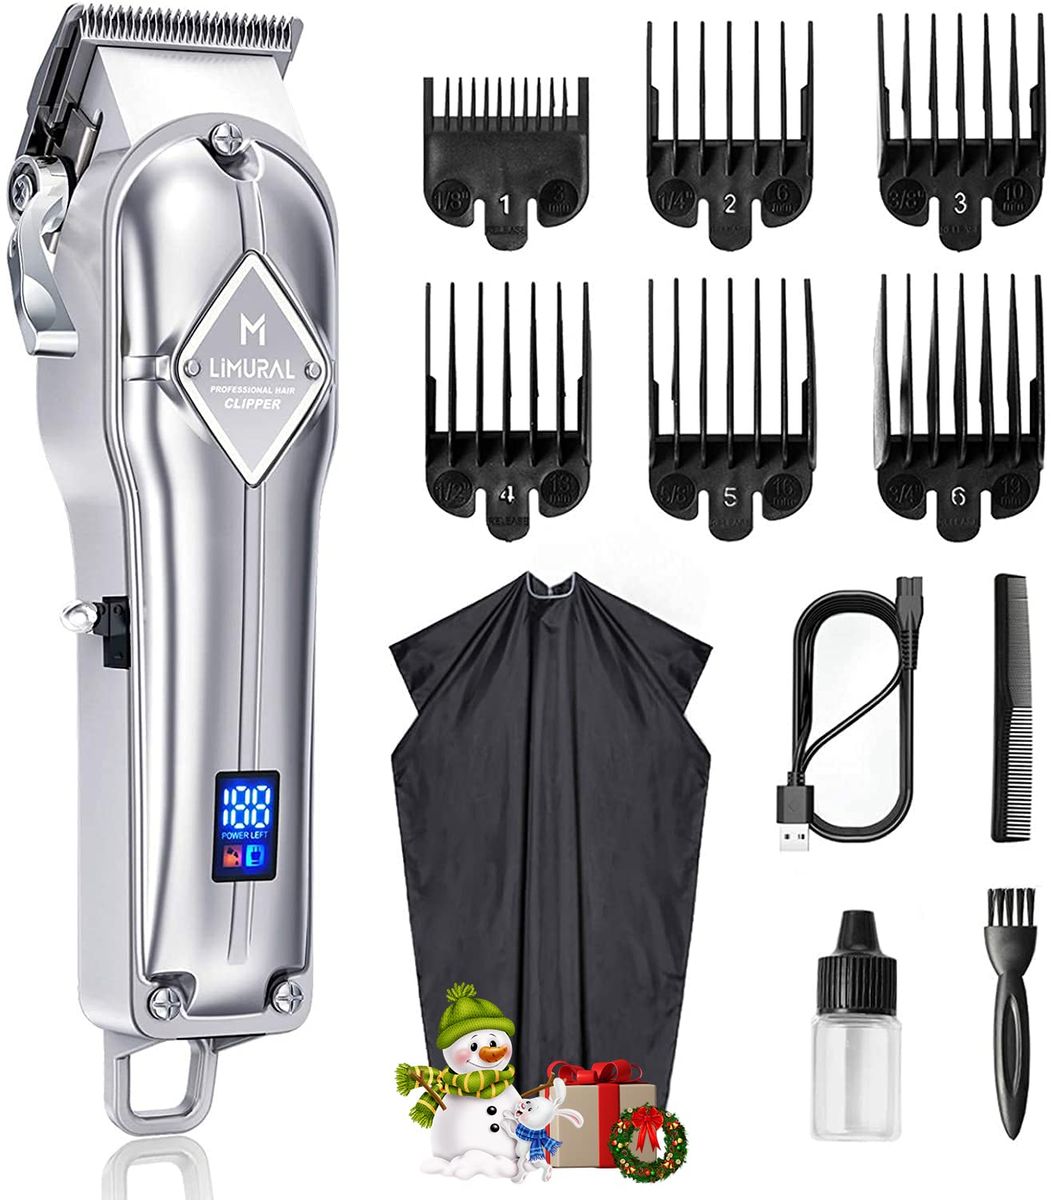 Limural - Professional rechargeable shaver for men, professional design, with heads for haircut, beard. Kit for hairdressers, LED light display.